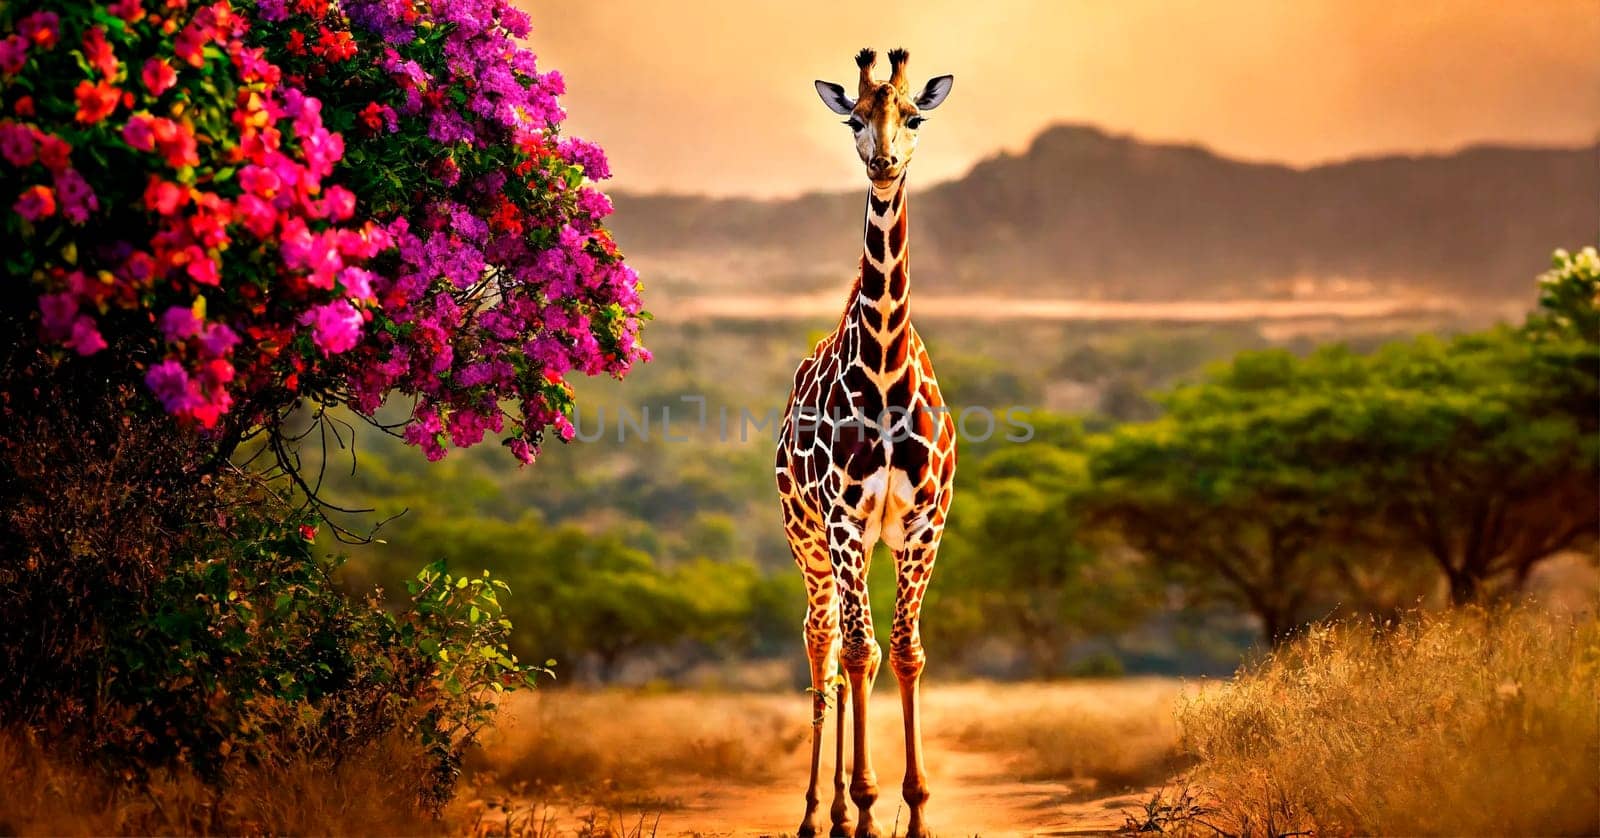 portrait of a giraffe with flowers. Selective focus. animal.